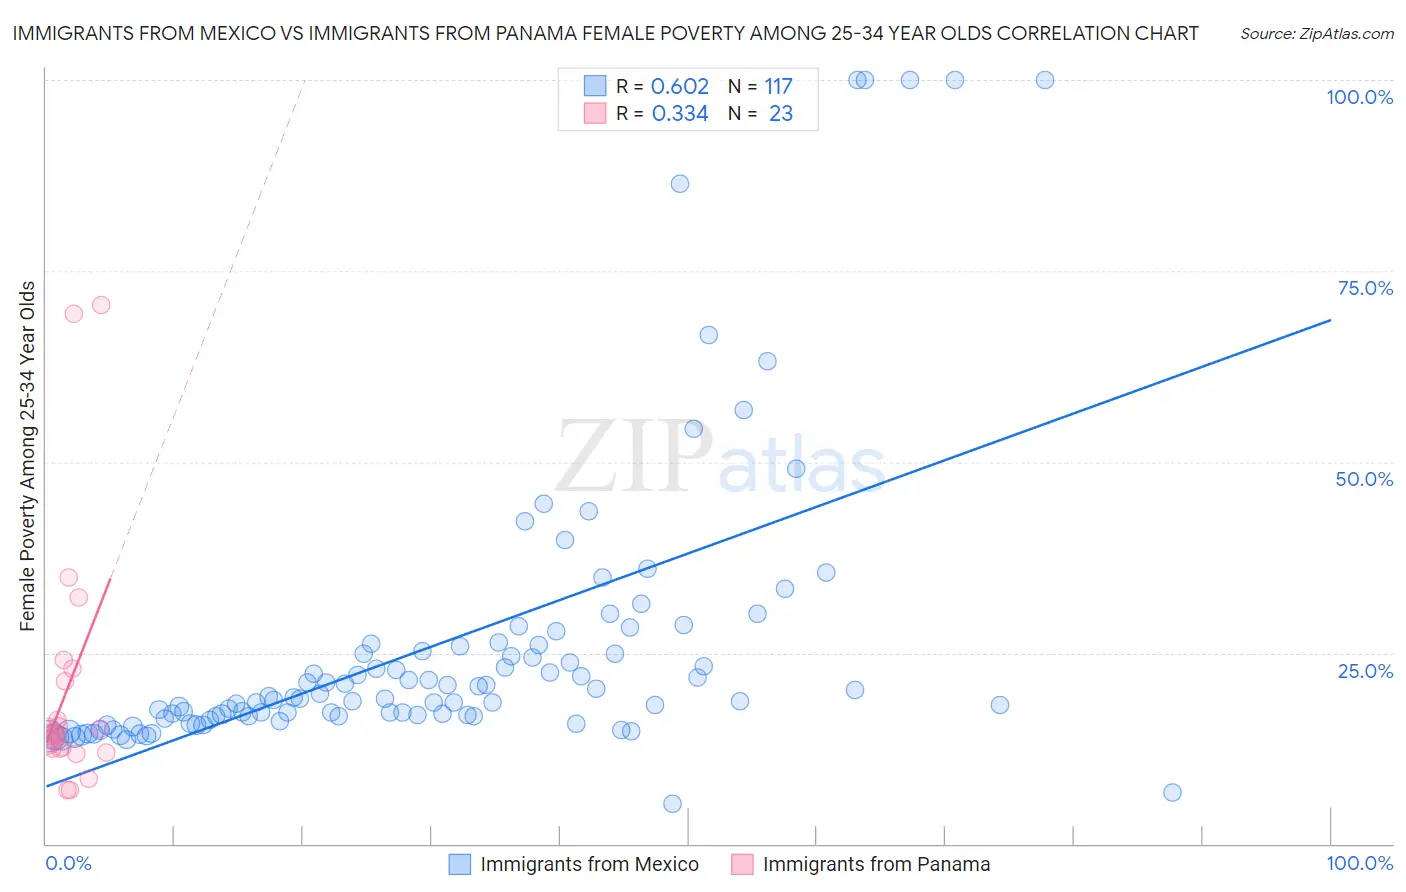 Immigrants from Mexico vs Immigrants from Panama Female Poverty Among 25-34 Year Olds